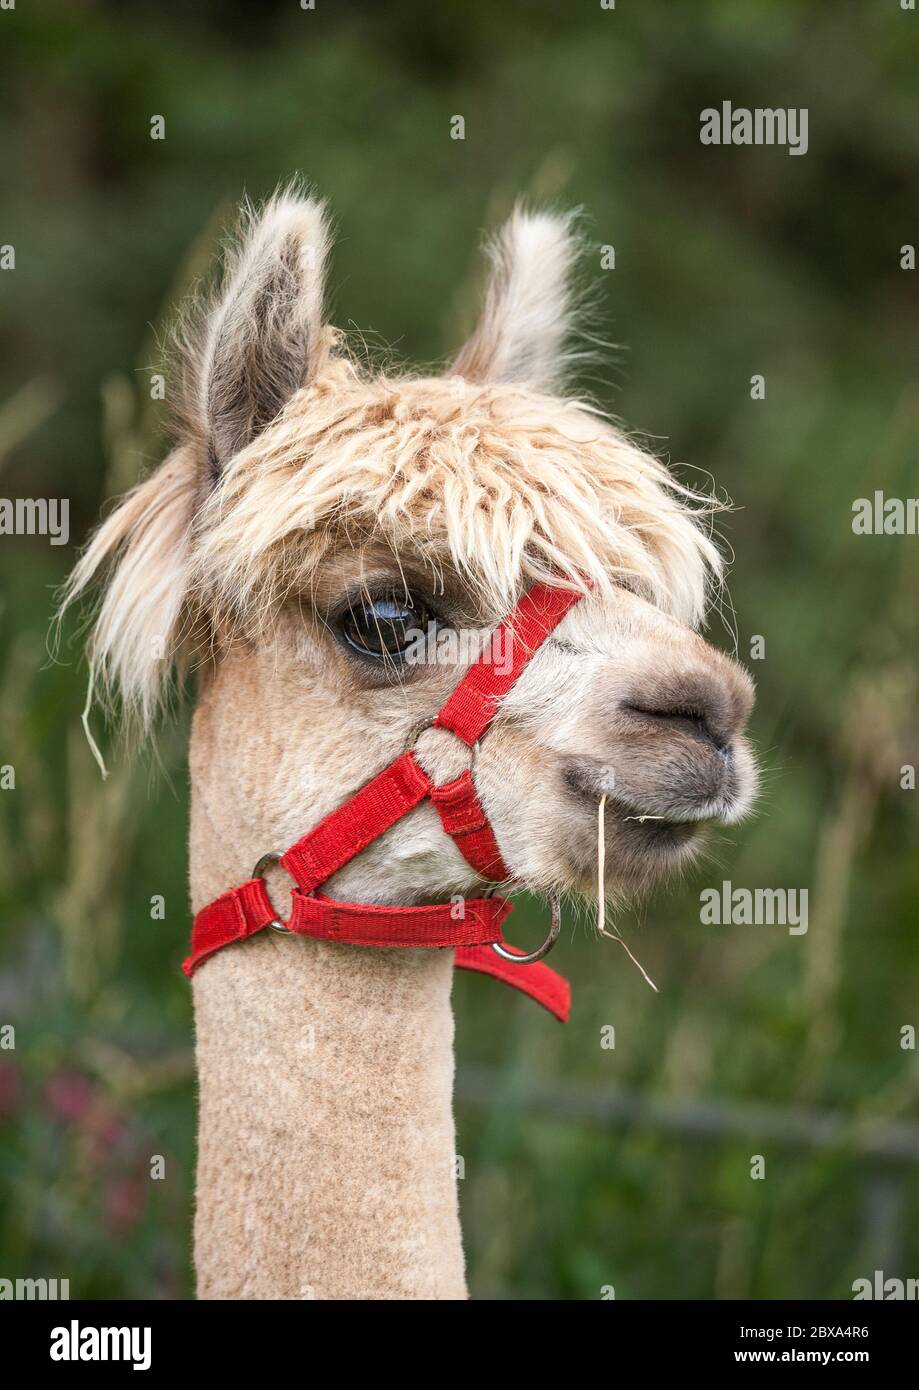 Head portrait of a domesticated alpaca with a red head collar and straw in mouth having a bad hair day at a local county show. Stock Photo